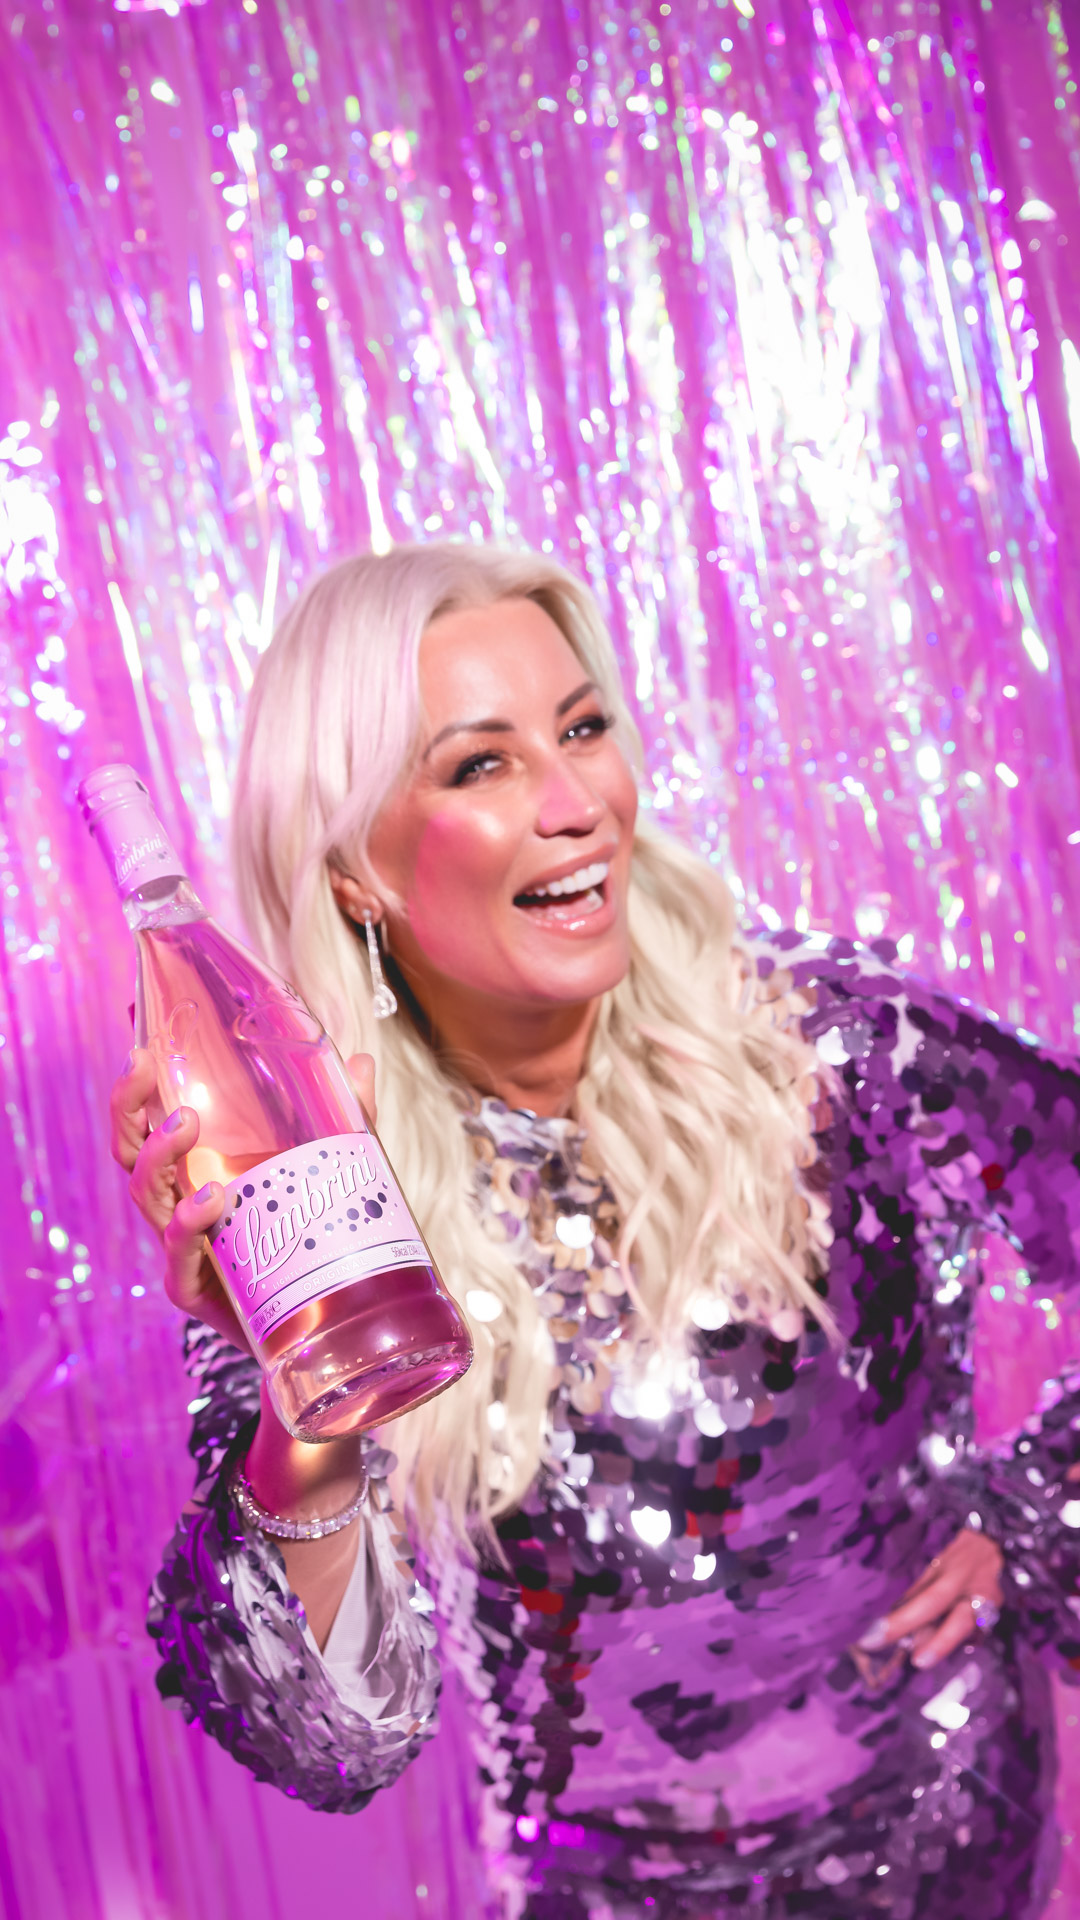 Lambrini and Denise Van Outen turn up the volume with Pride single